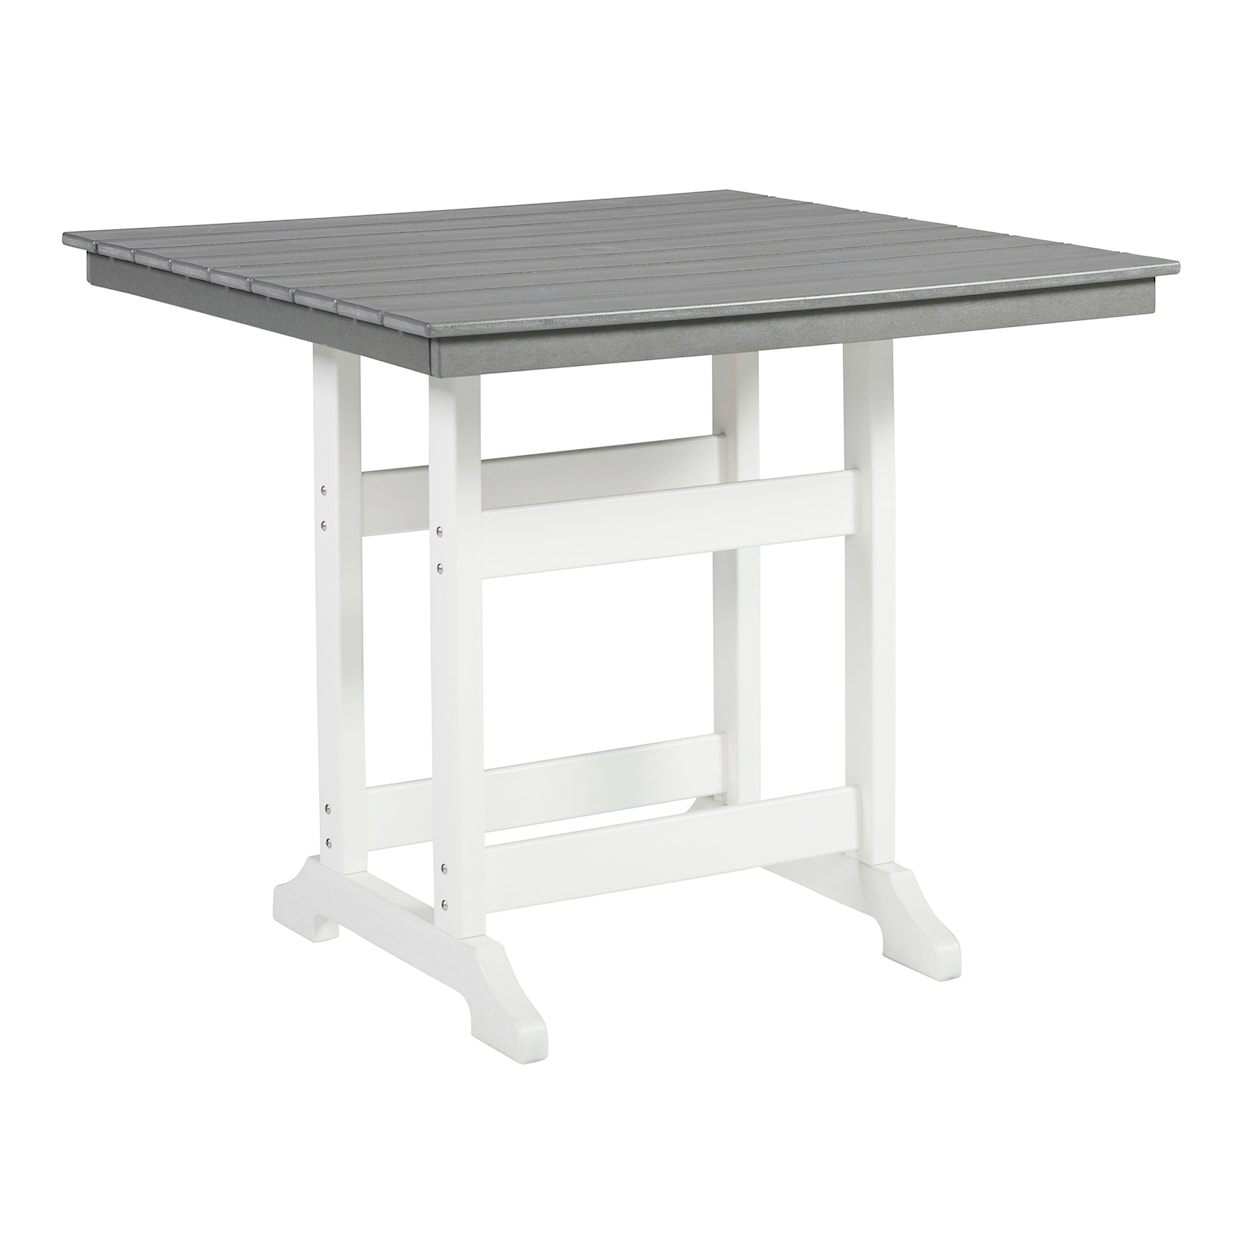 Benchcraft Transville Outdoor Counter Height Dining Table